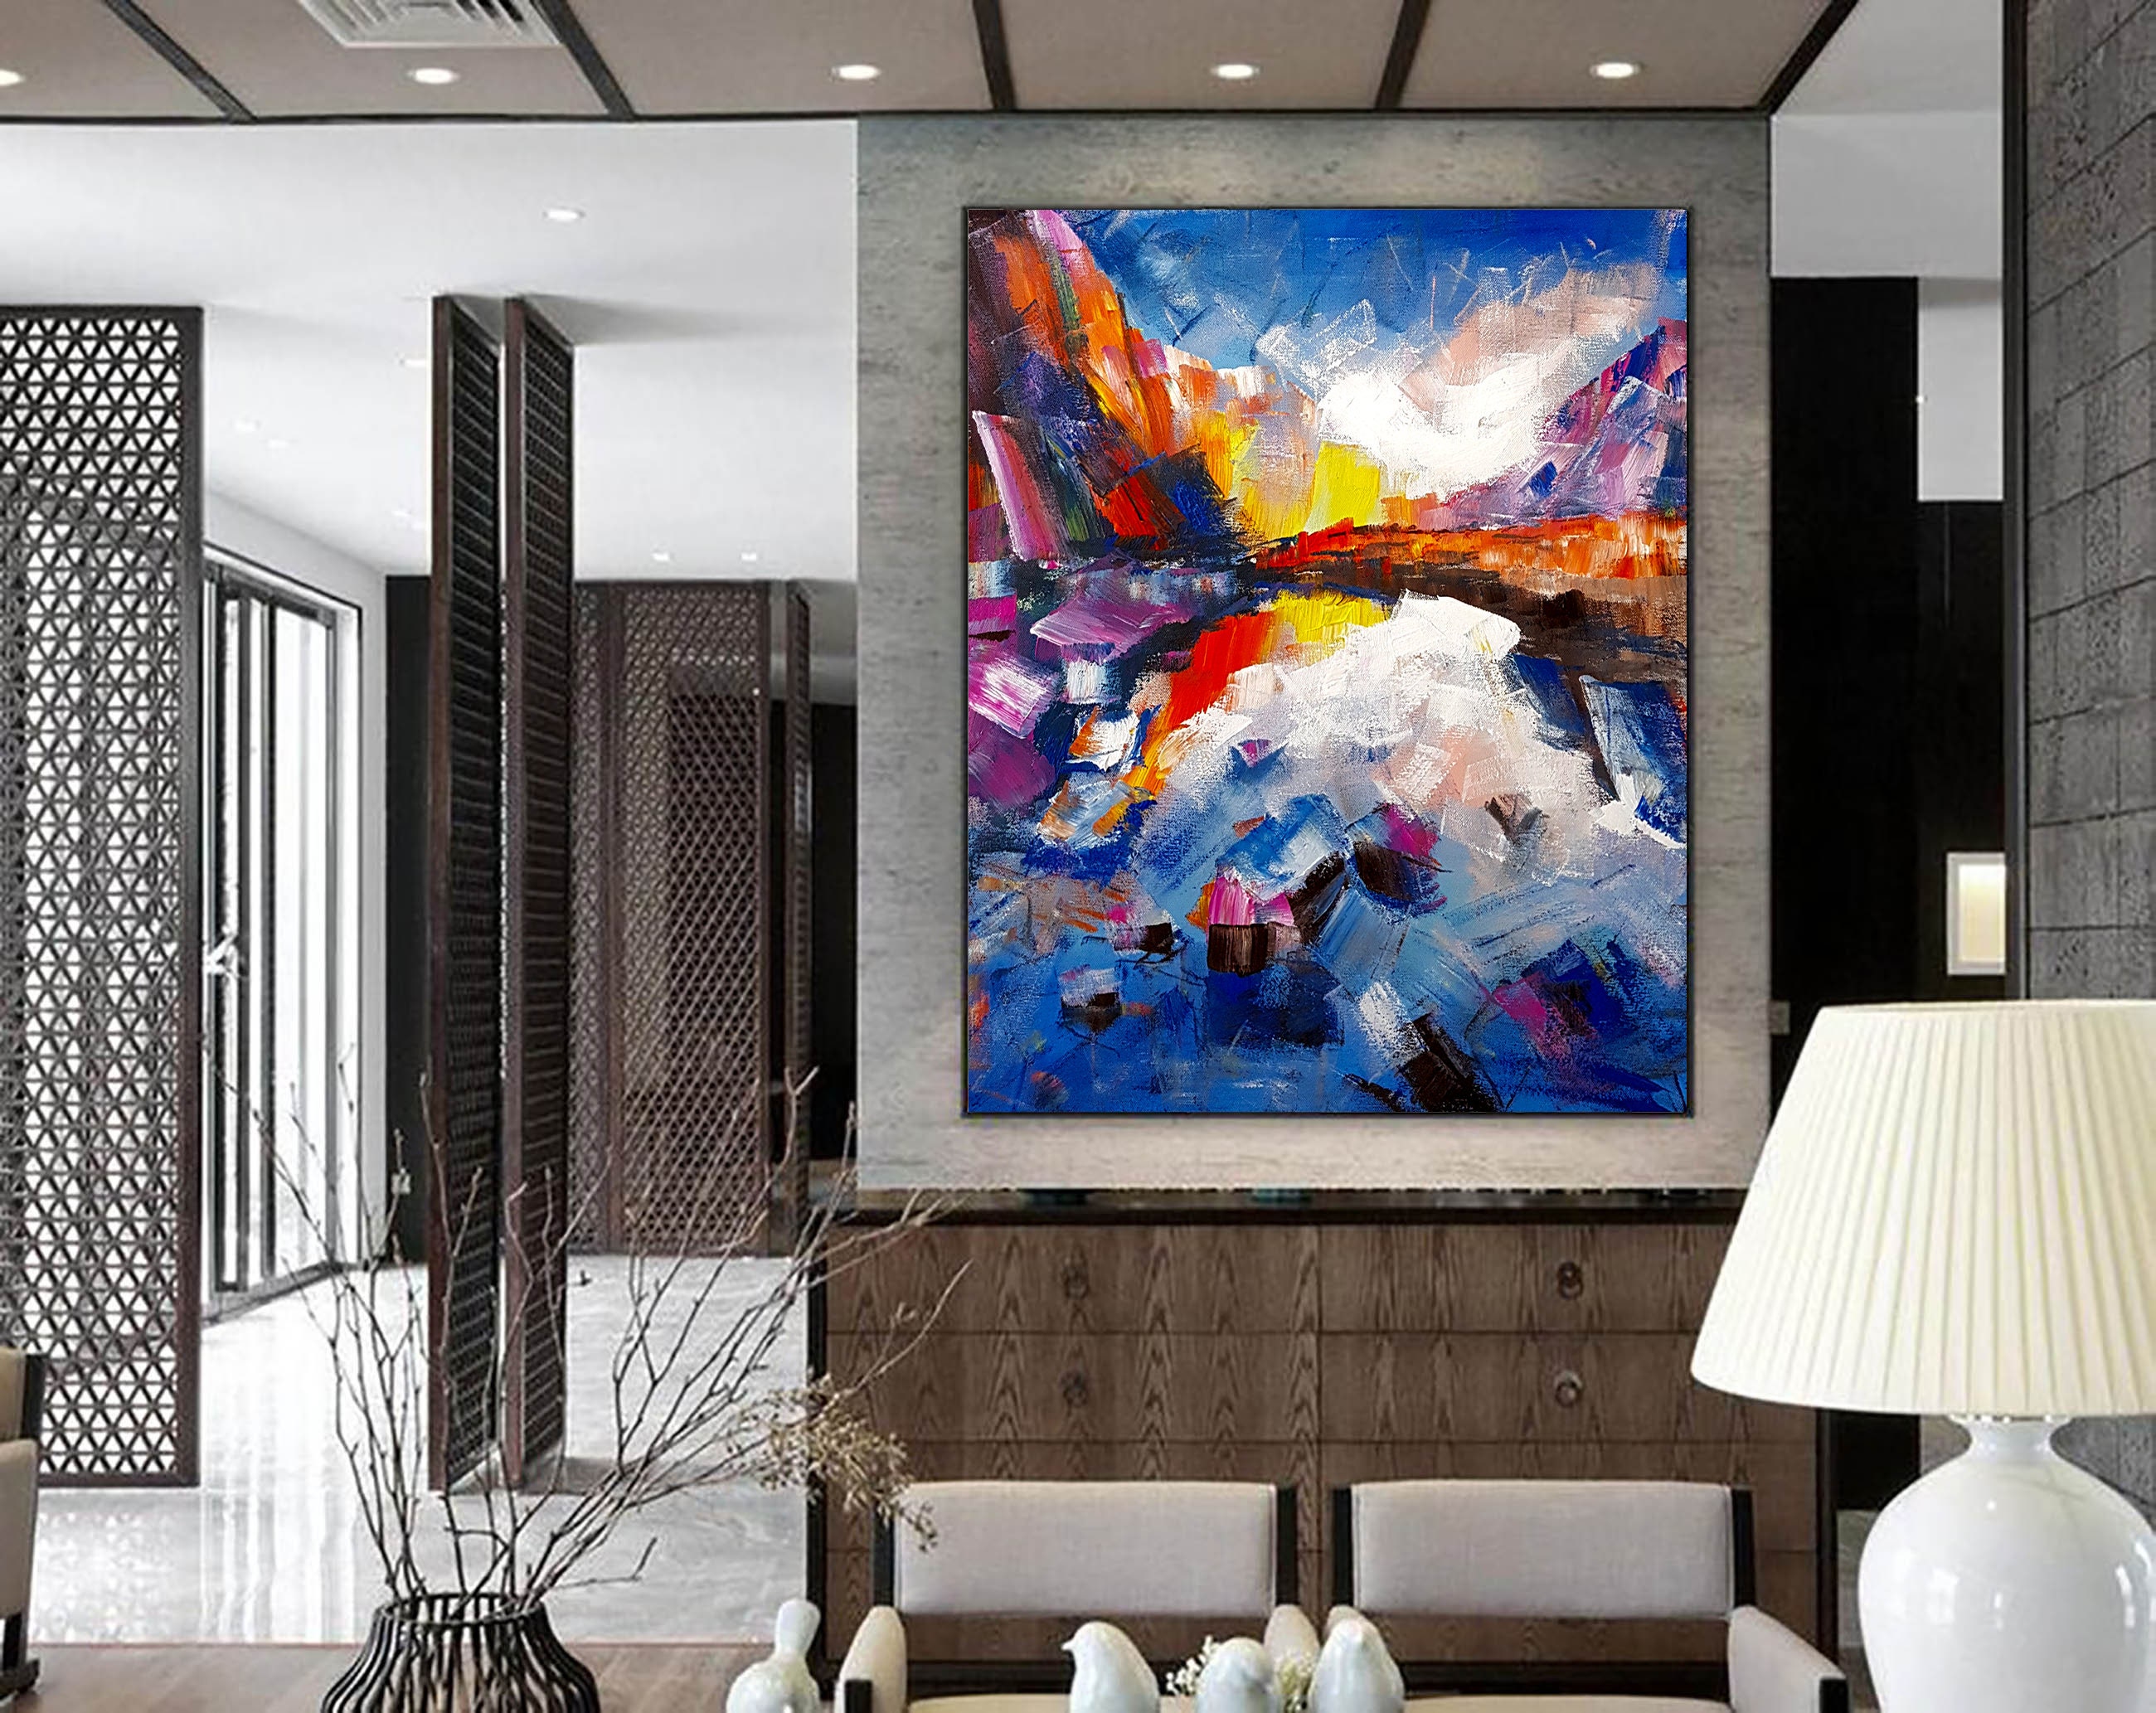 Large Abstract Painting On Canvas,Large Painting On Canvas,Painting Home  Decor,Canvas Large,Livingroom Decor